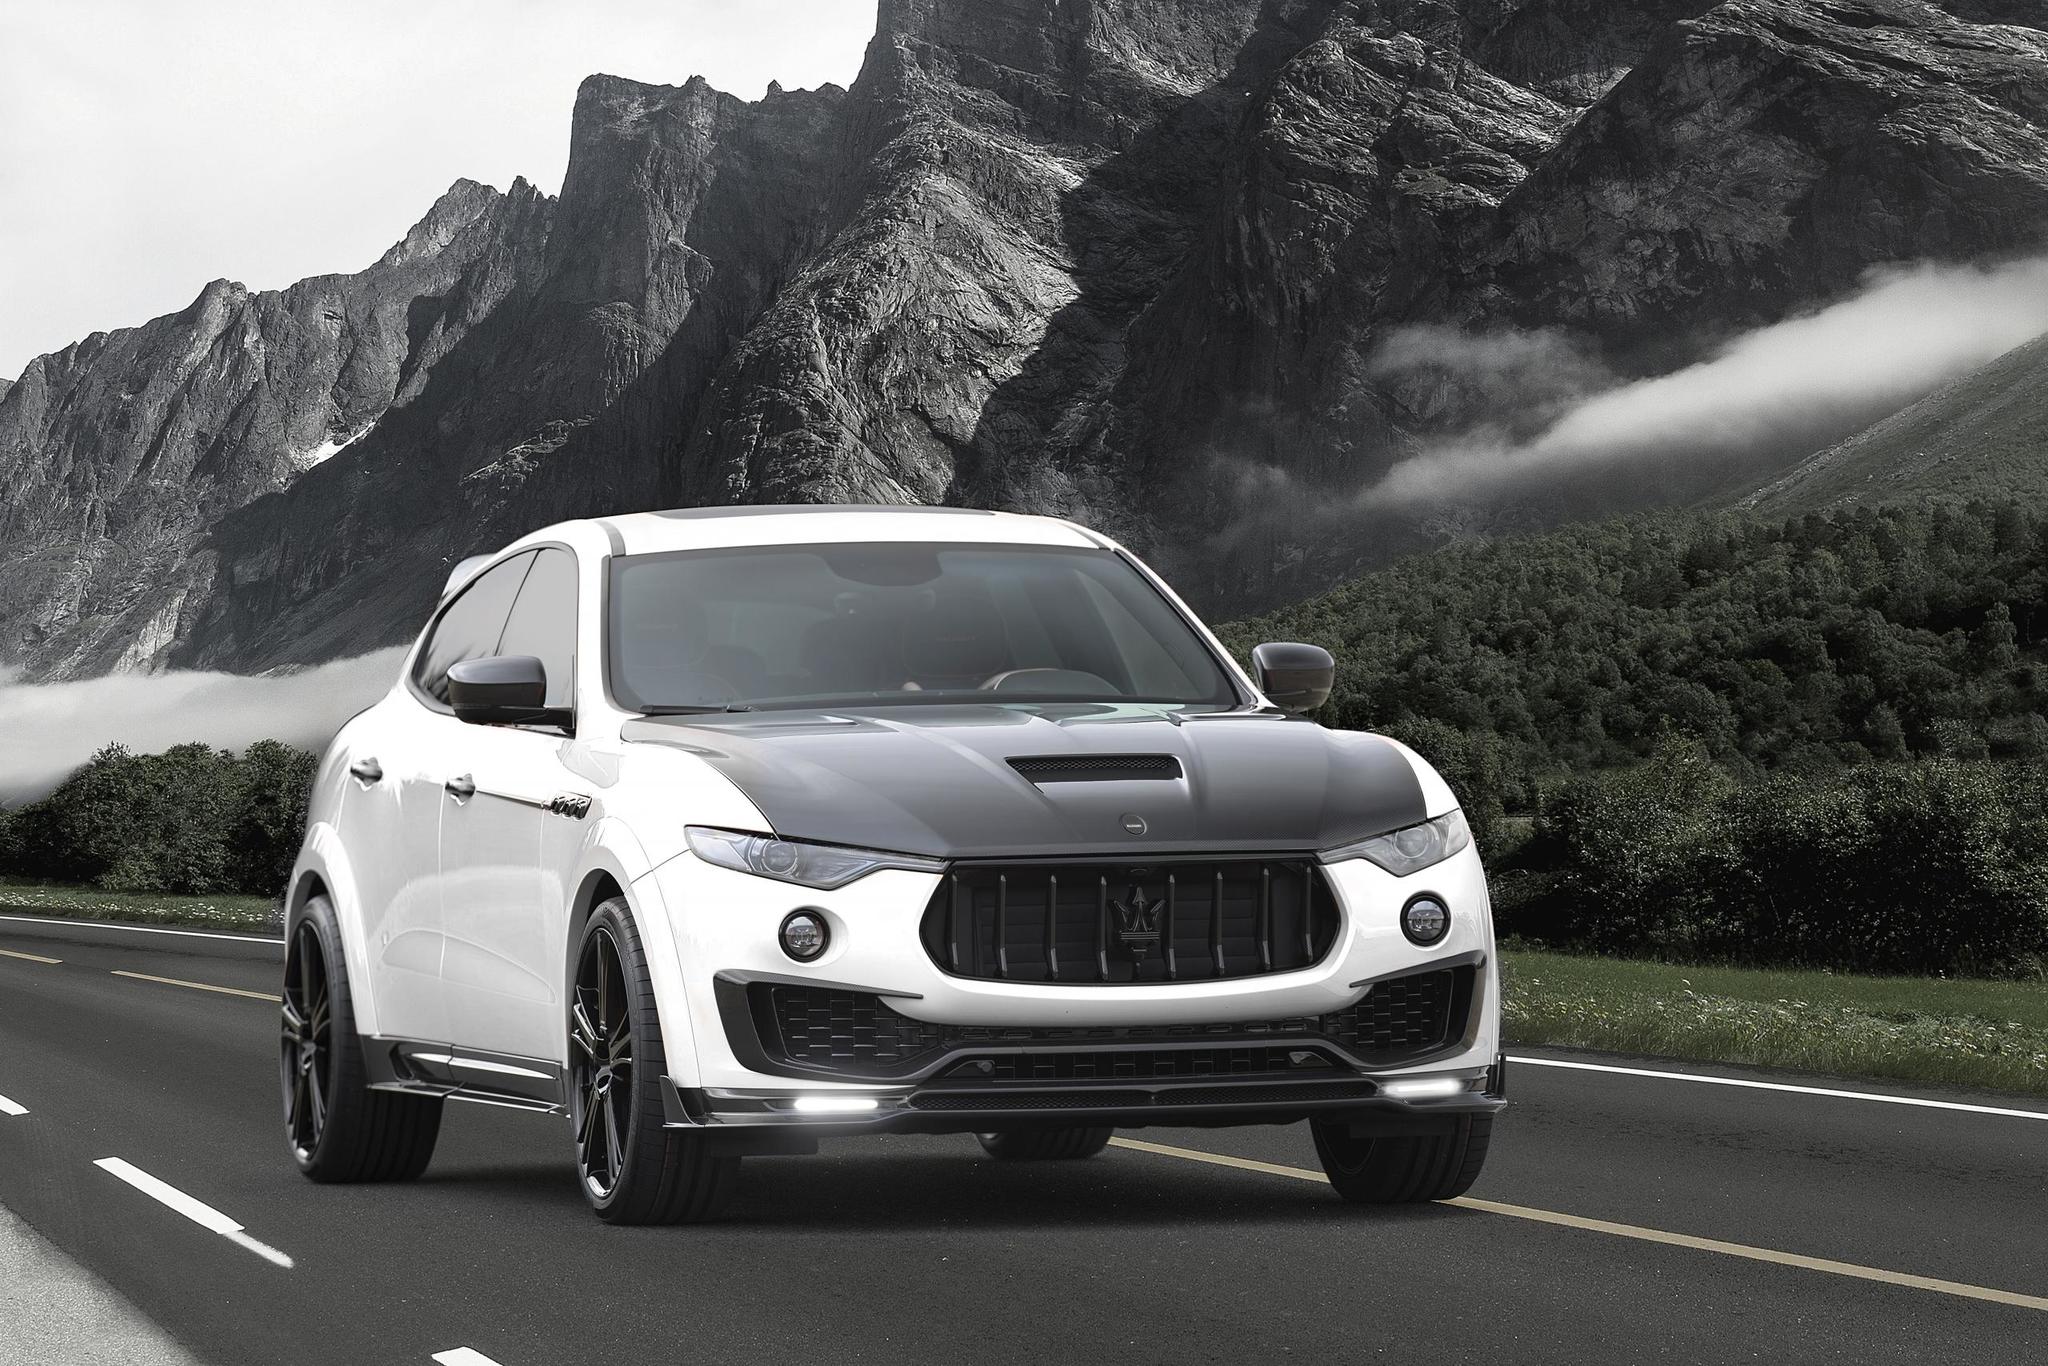 Mansory Carbon Fiber Body kit set for Maserati Levante Buy with delivery,  installation, affordable price and guarantee